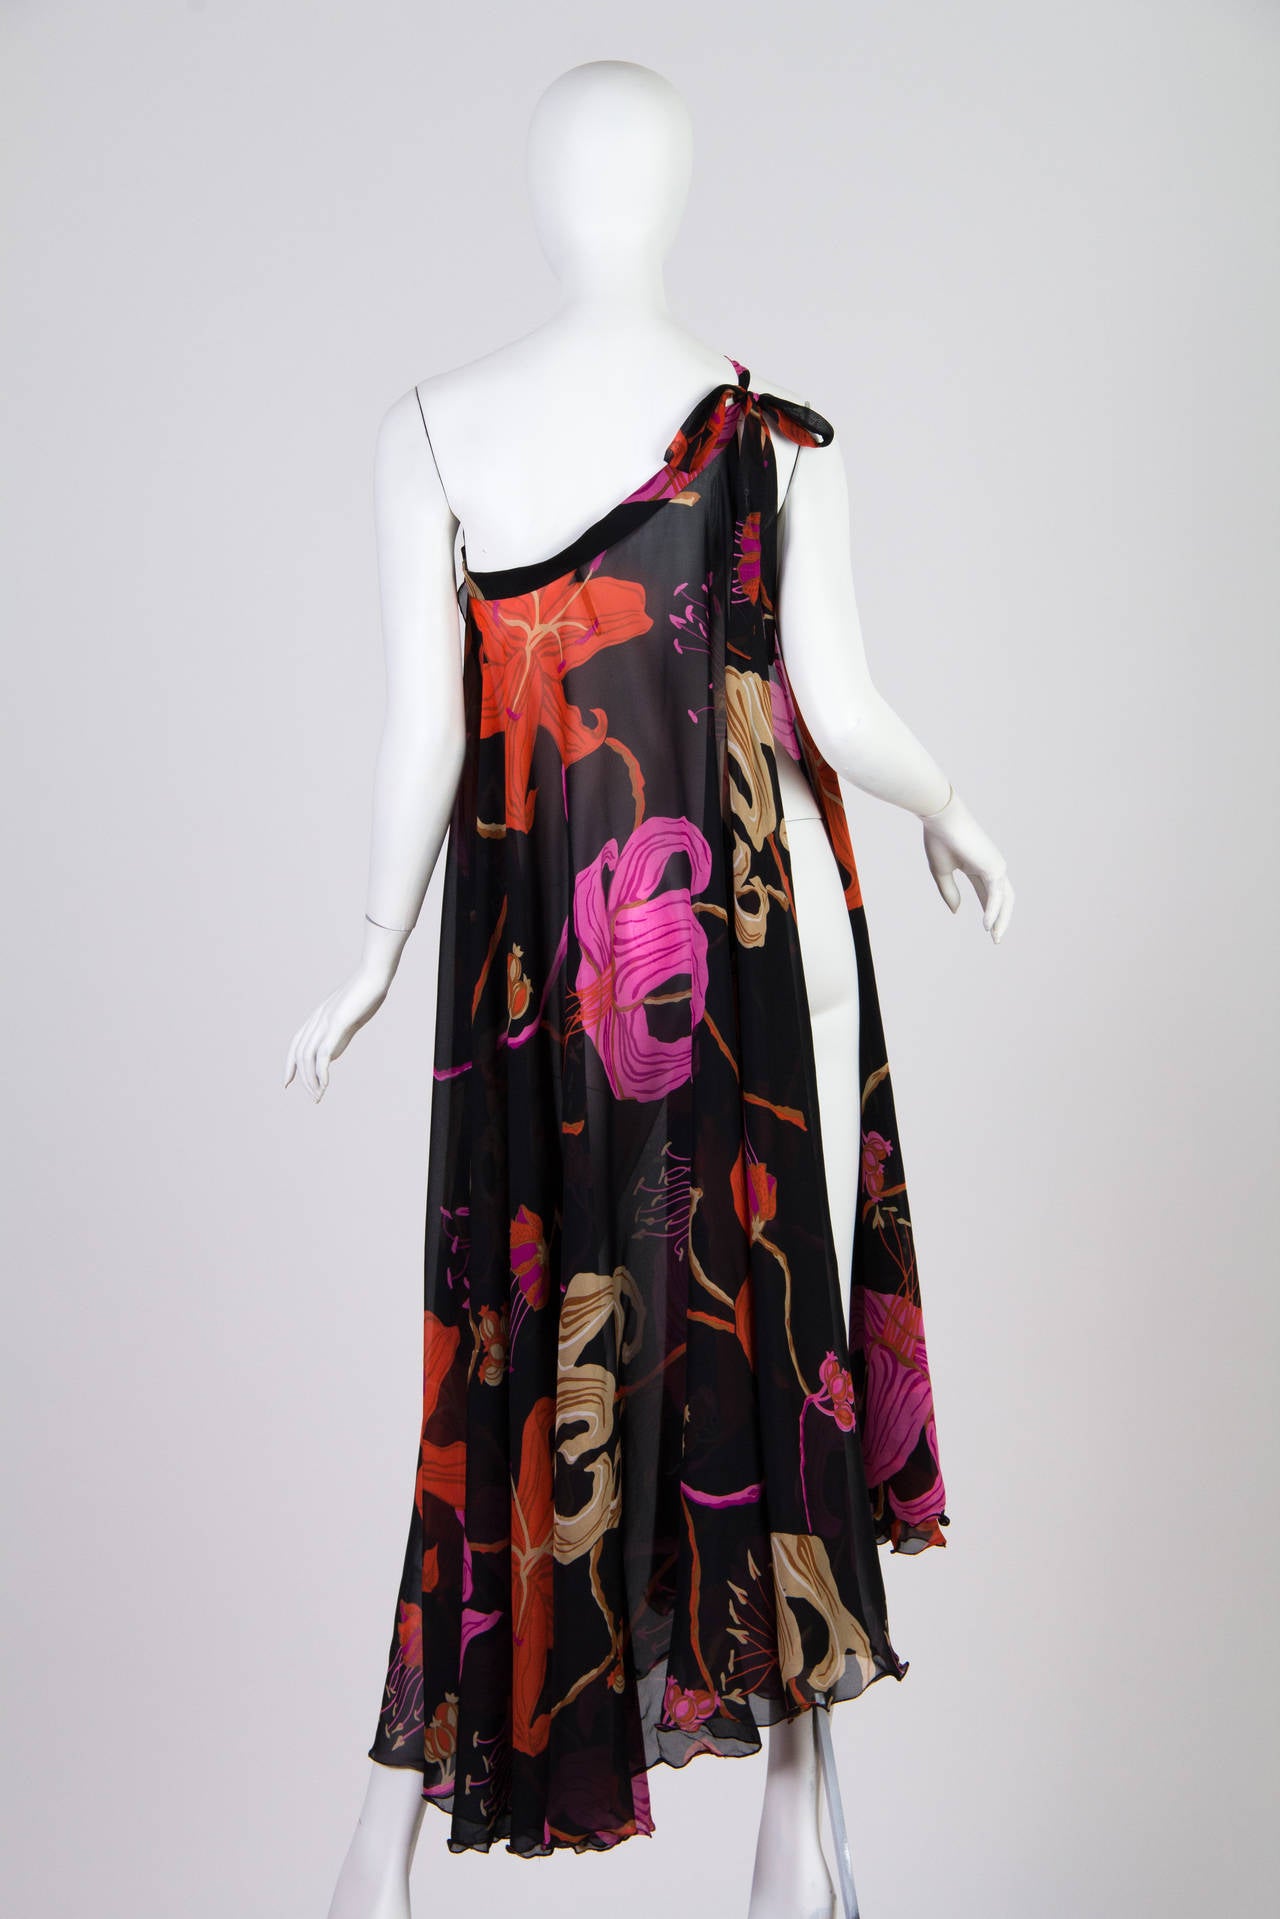 A beautiful and versatile piece from the fabulous 1970s. This piece is made from the finest Italian silk which is woven so fine yet so tight it maintains it's floaty weight yet resists wrinkling. Designed to be worn both as a skirt and as a dress.